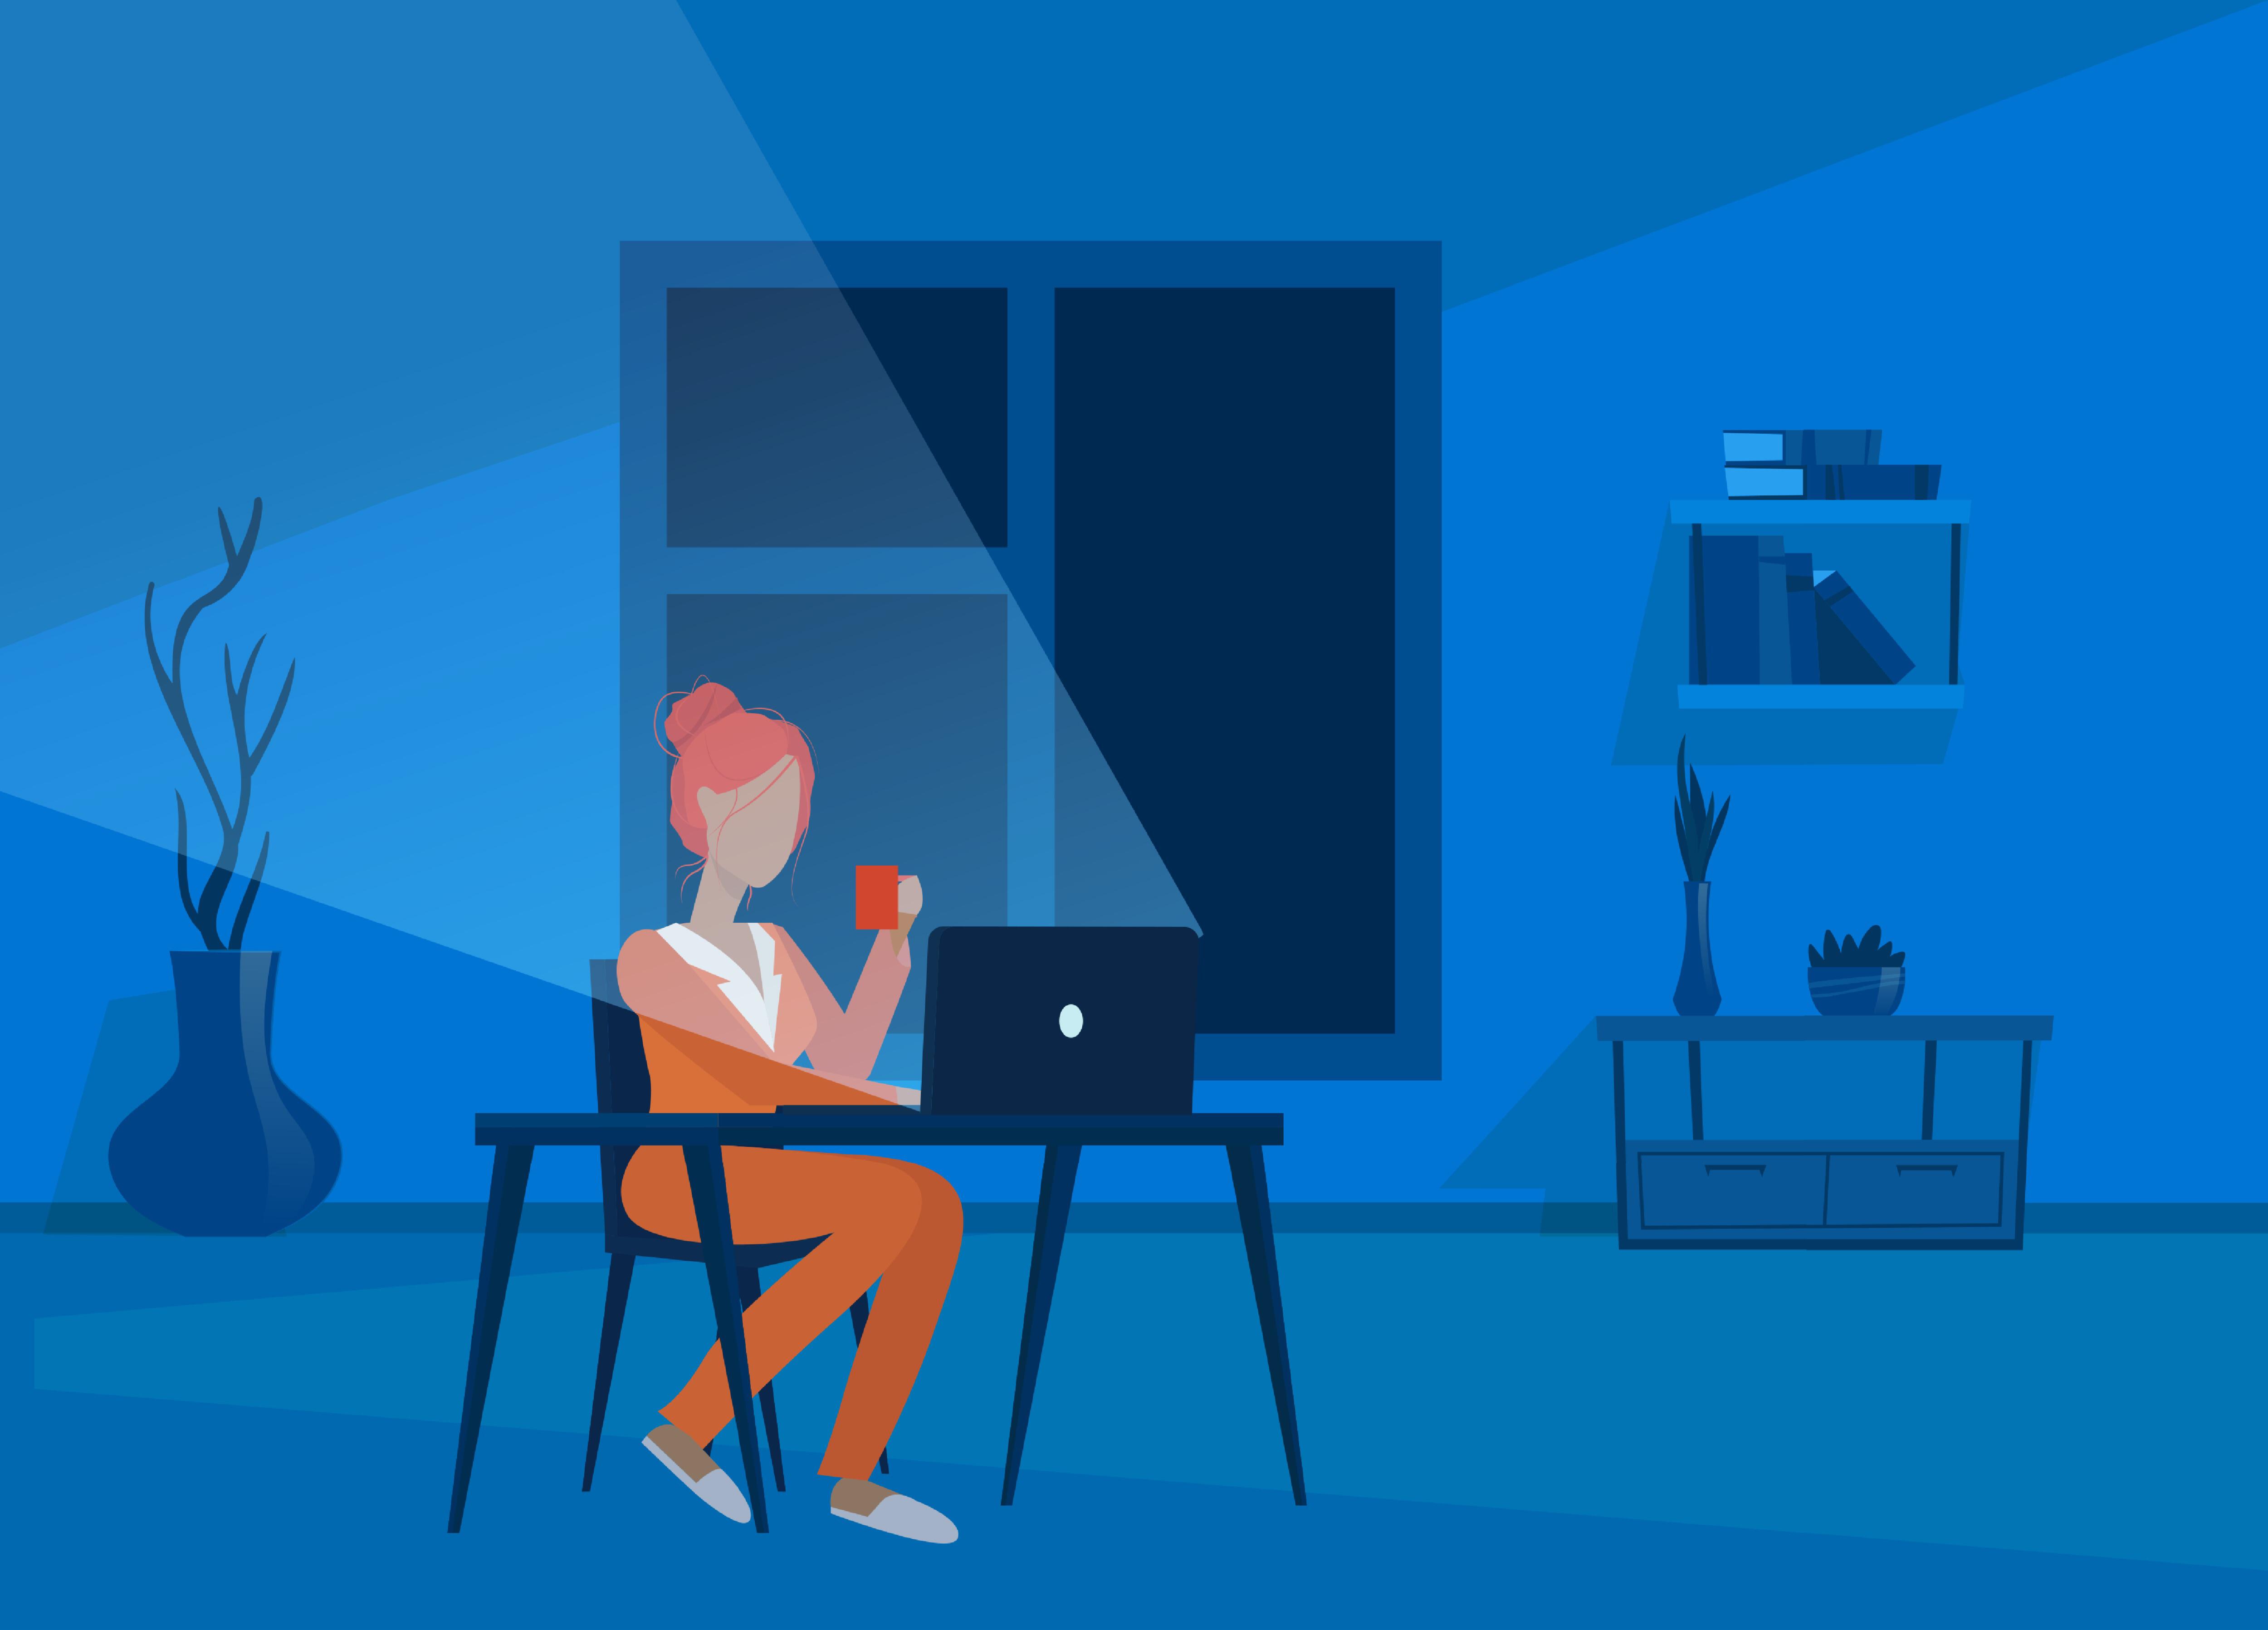 Cartoon of a woman sitting at her laptop at night